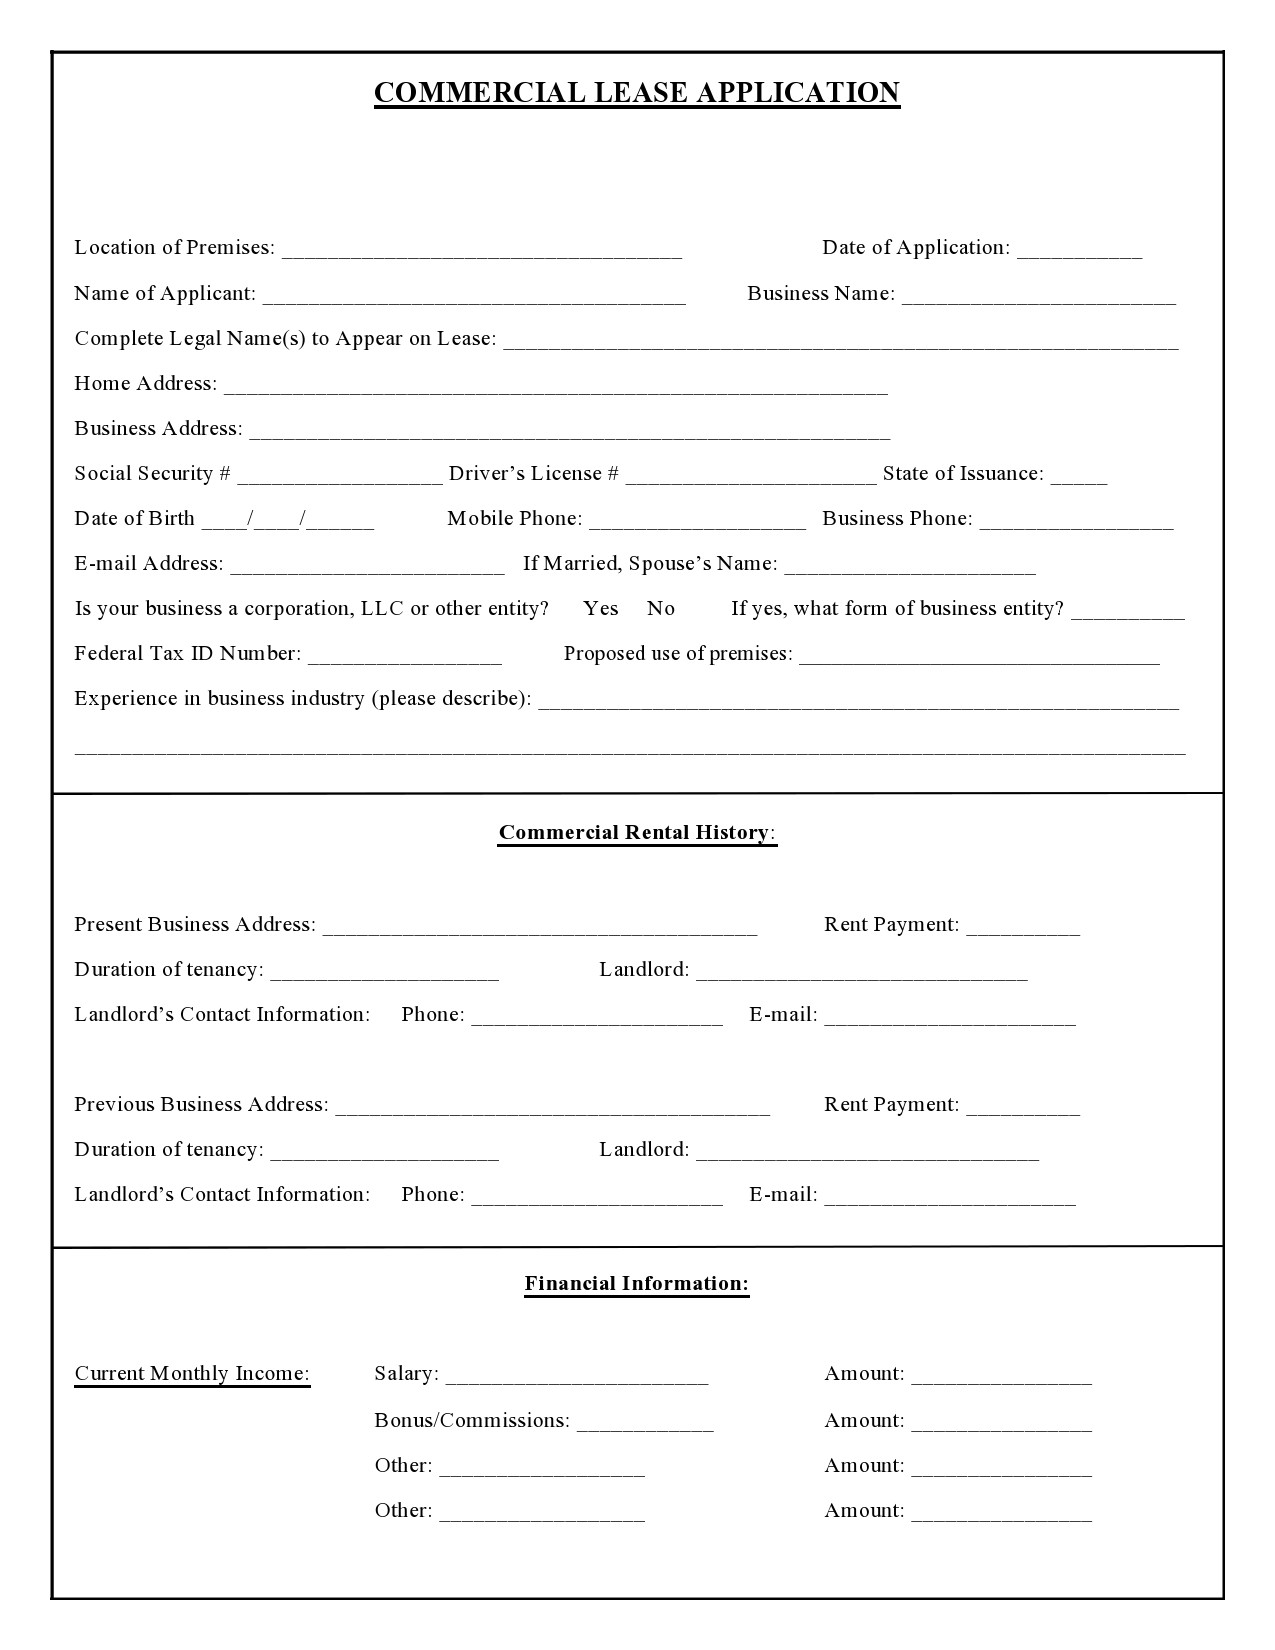 Free commercial lease application 21